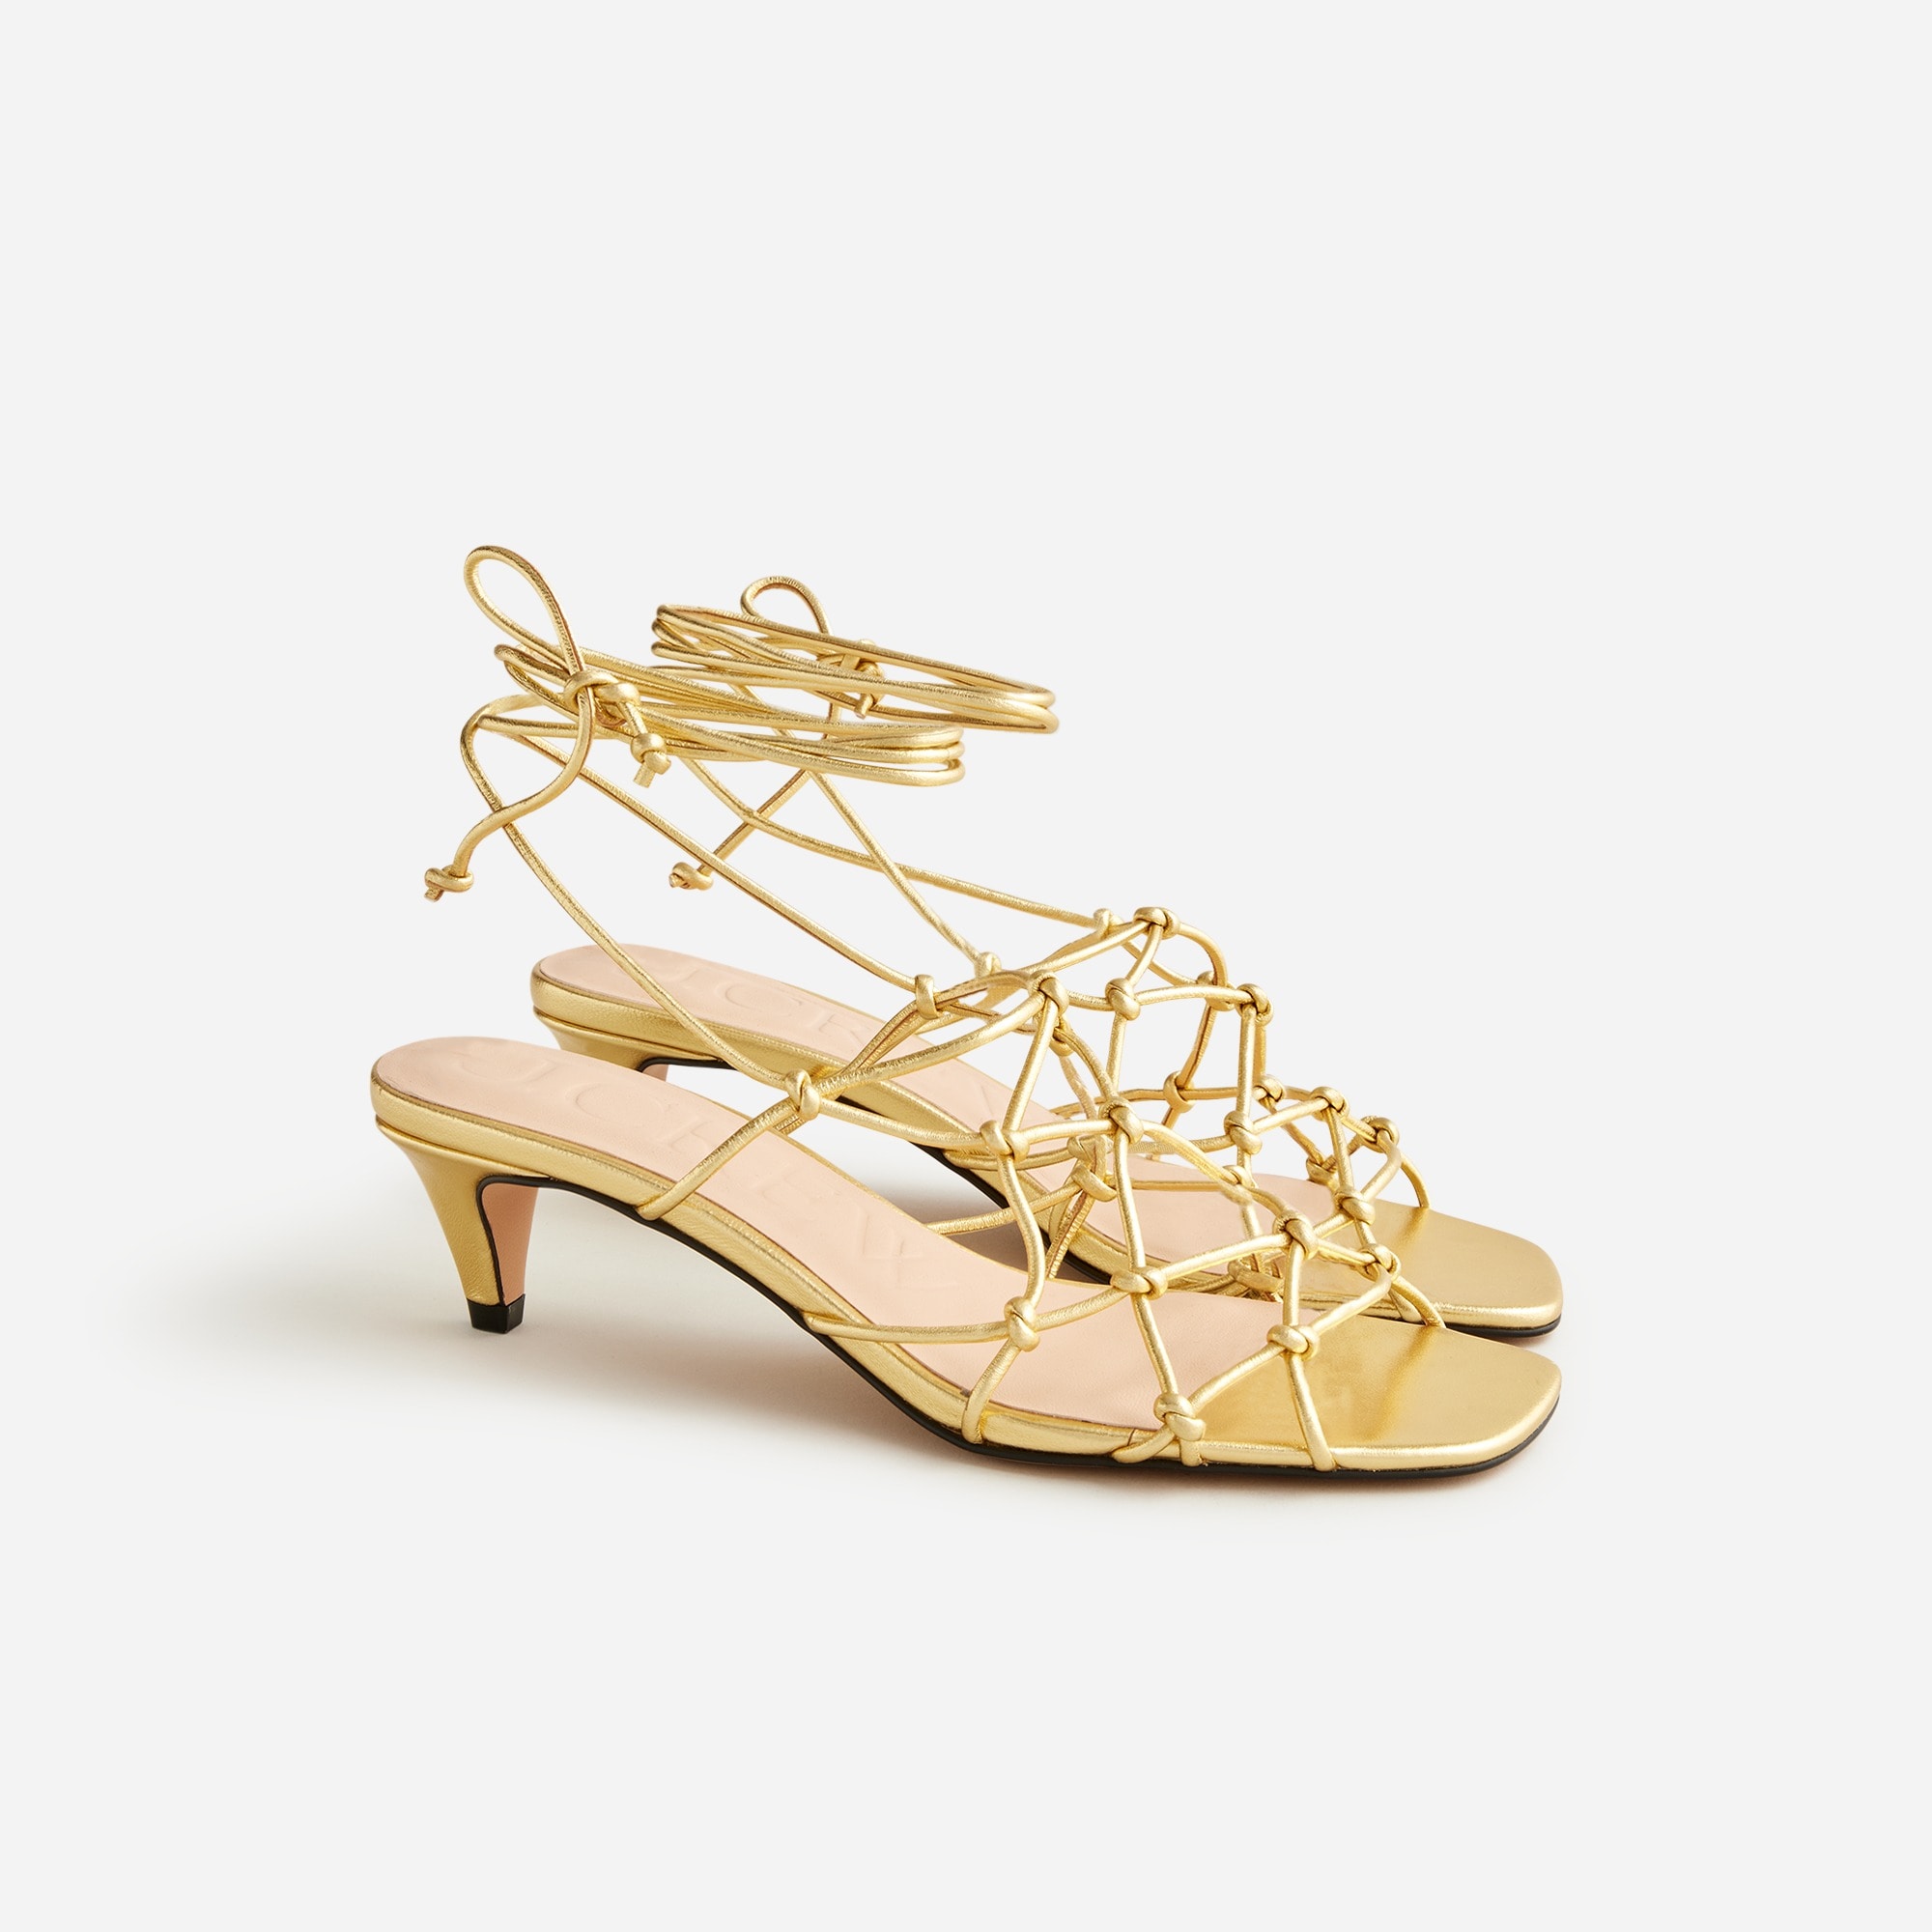  Pre-order Zadie knotted lace-up kitten heels in metallic leather